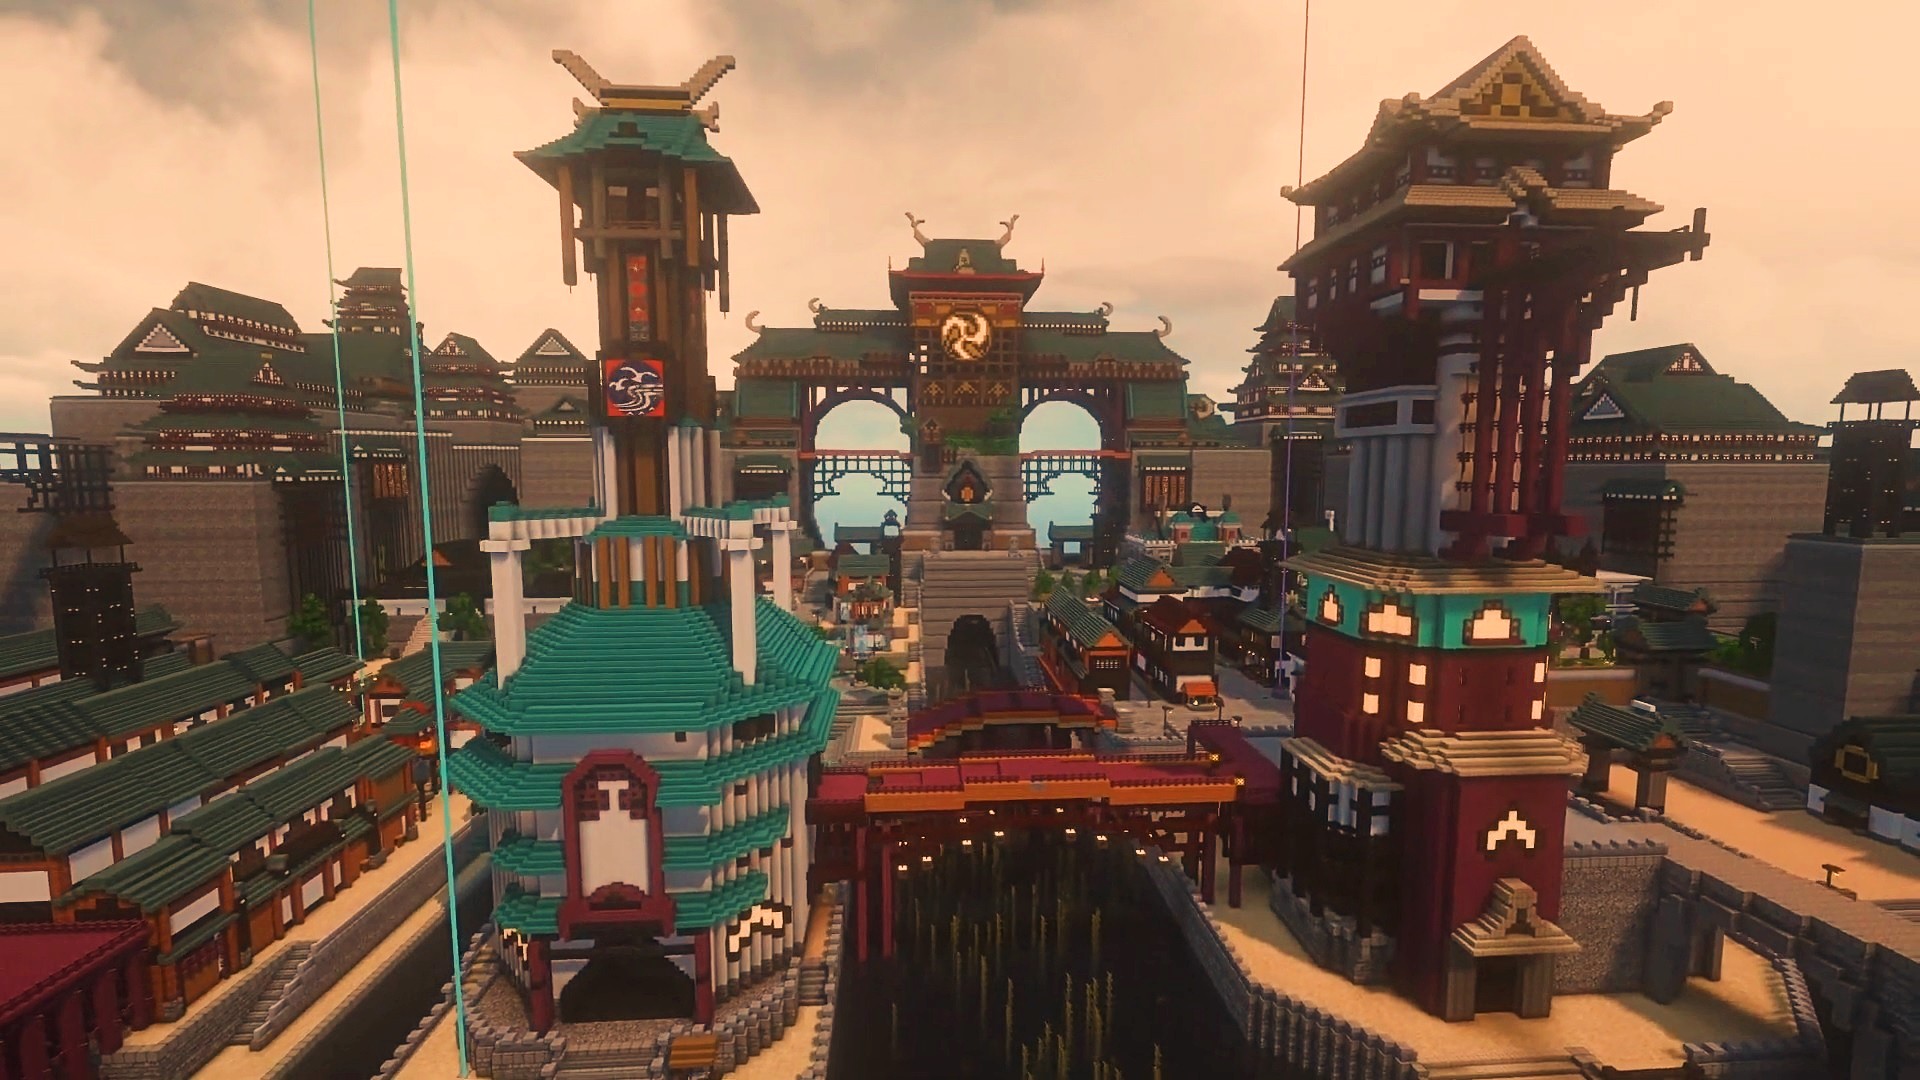 This Minecraft fan’s recreation of FFXIV’s Kugane is stunning